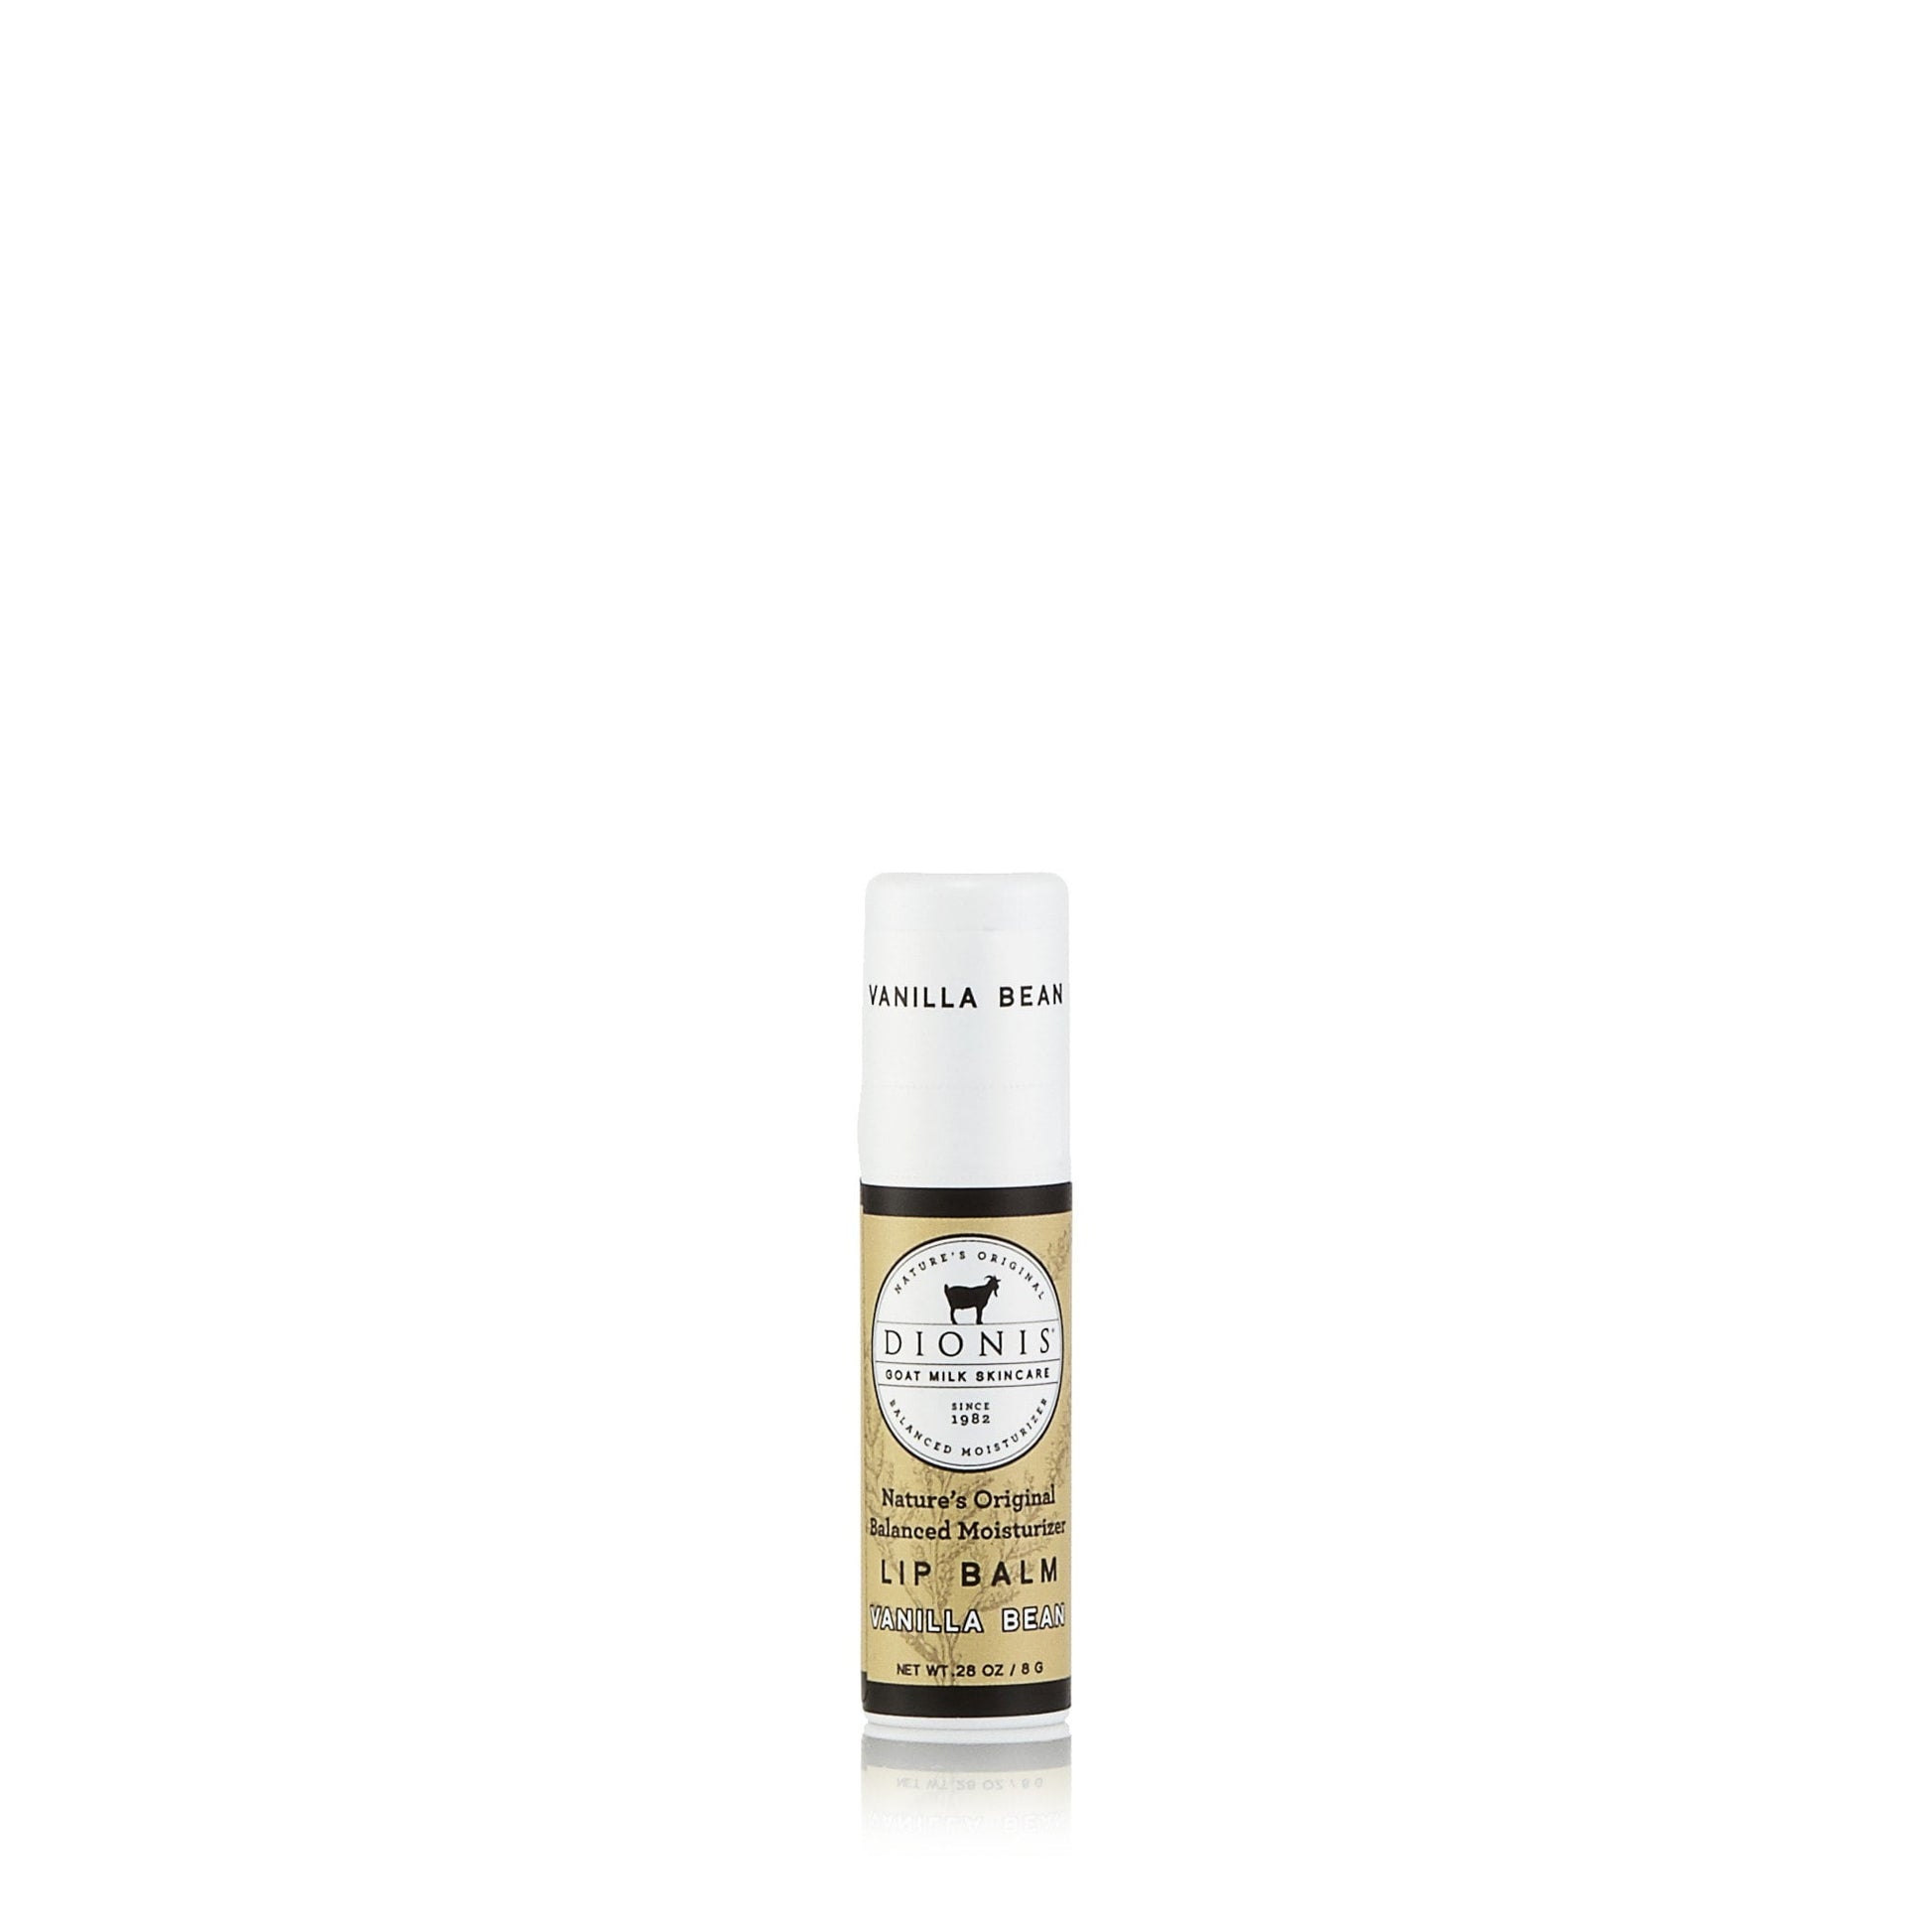 Lip Balm by Dionis, Product image 1